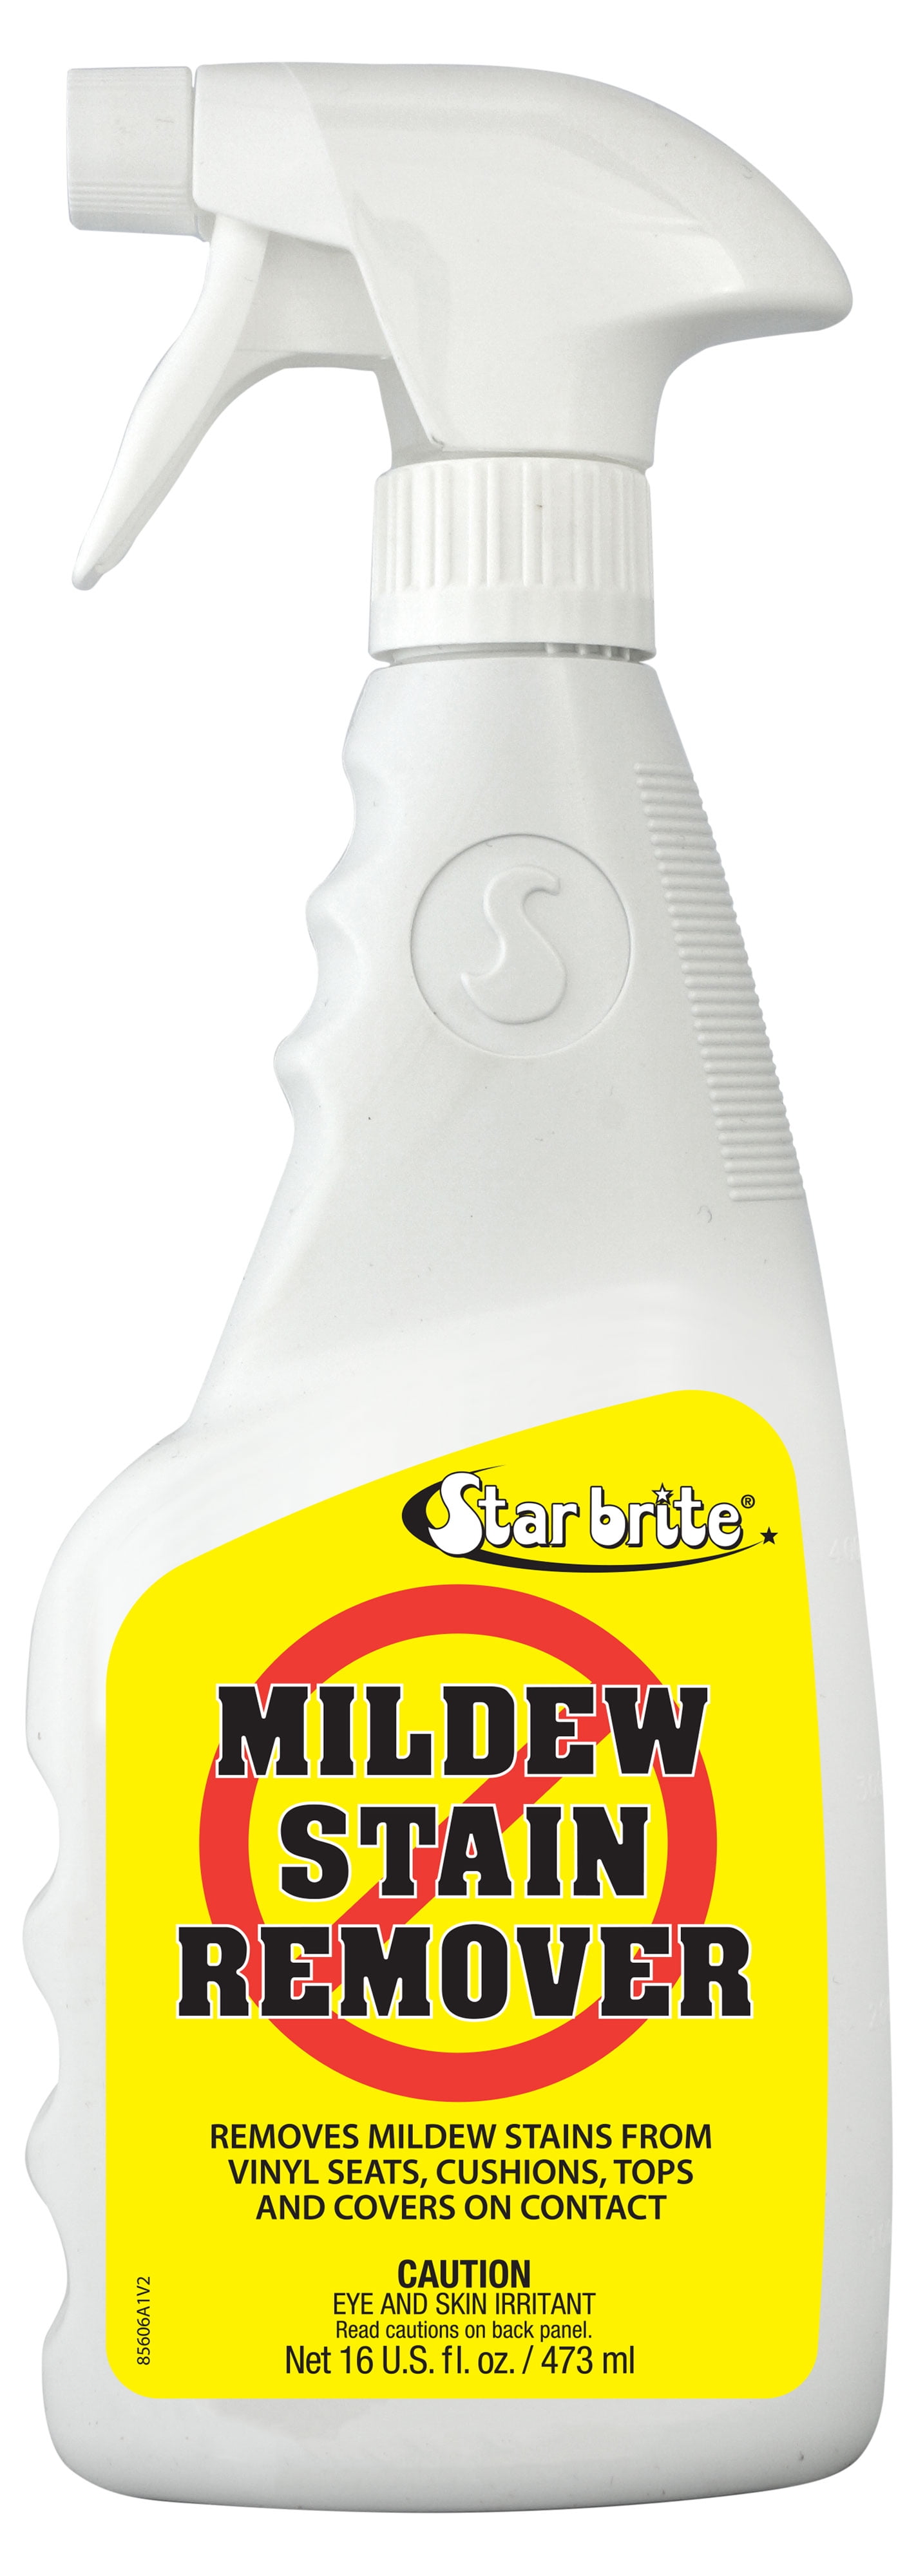 Star Brite Mildew Stain Remover, 16 oz - Triple-Action Formula Works Instantly